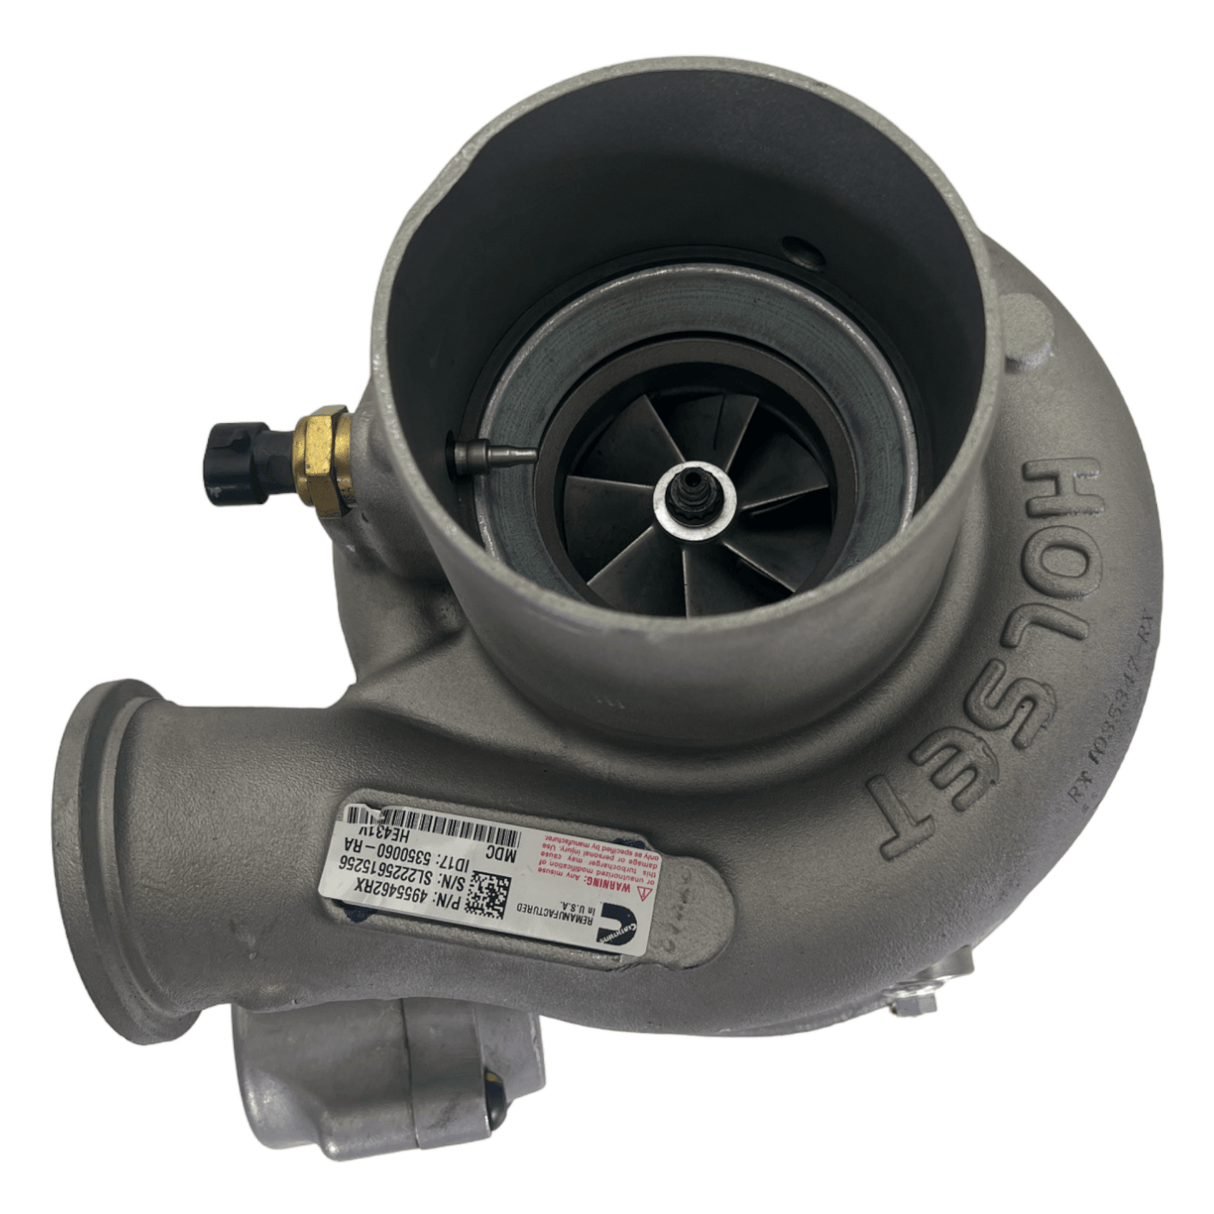 4955462Rx Genuine Cummins Turbocharger He431V For Ism M11 - Truck To Trailer